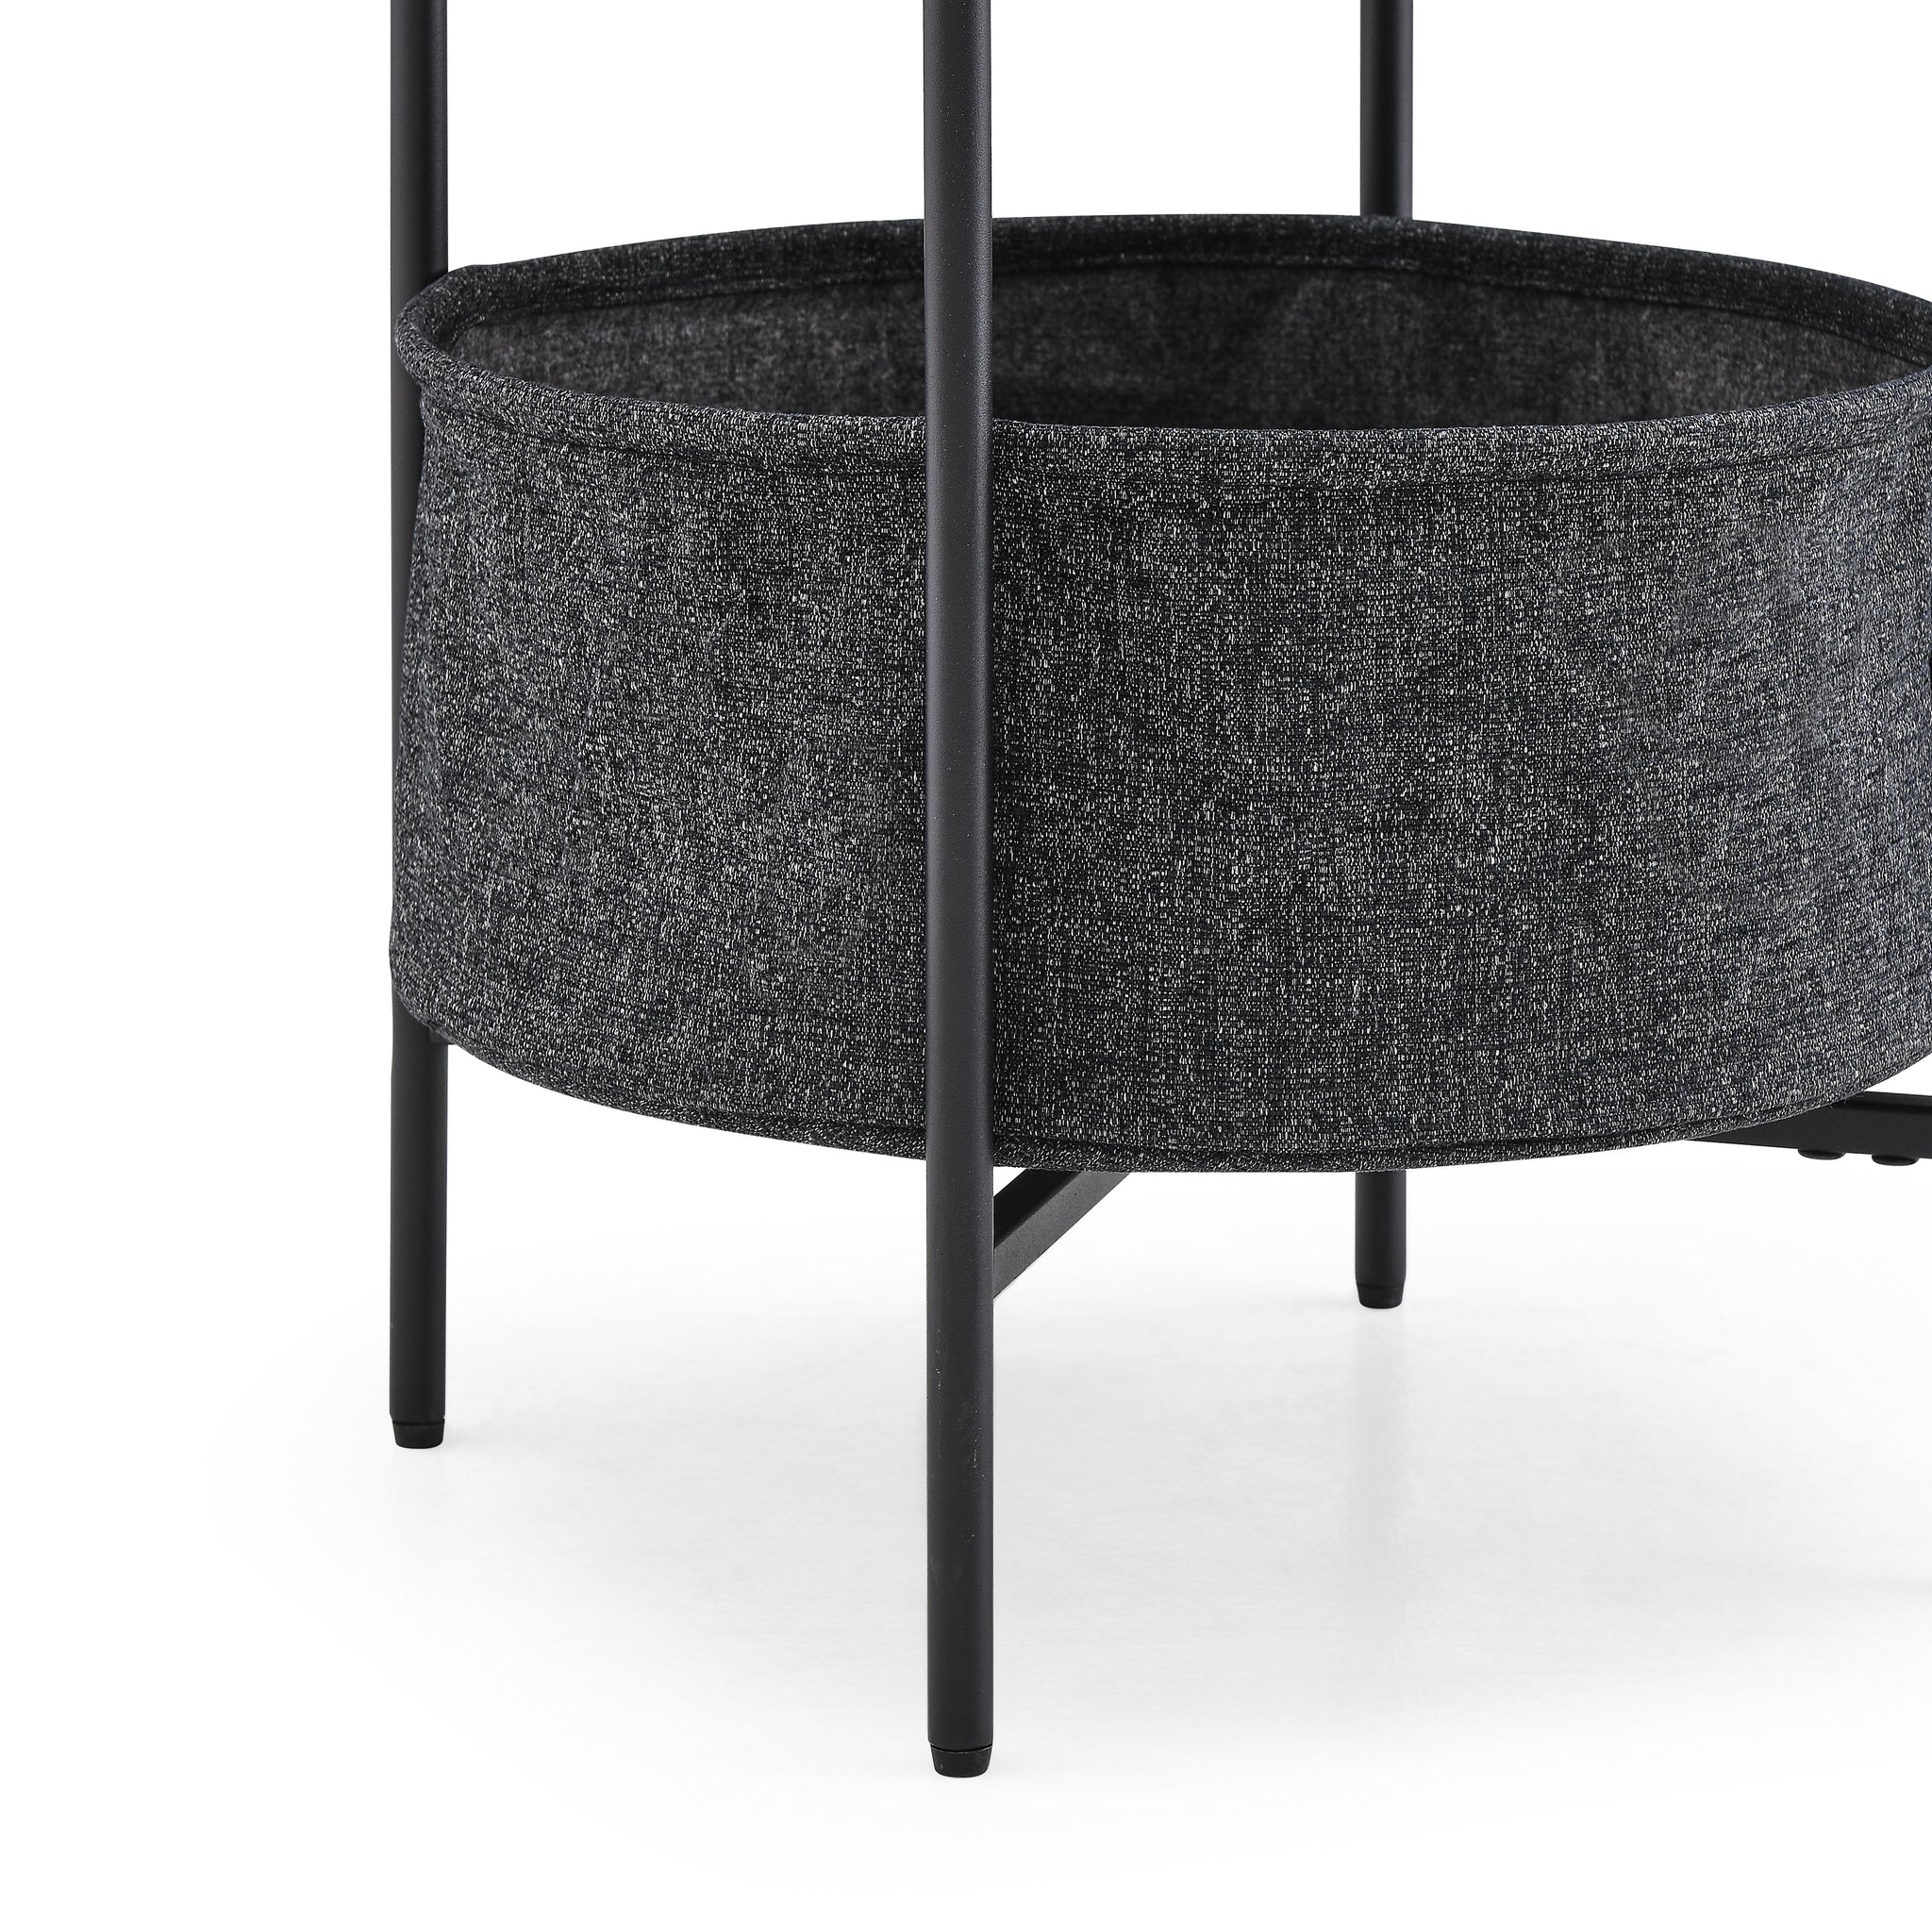 Modern Accent End Table with Storage Basket，Grey Cloth Bag and Brown Top